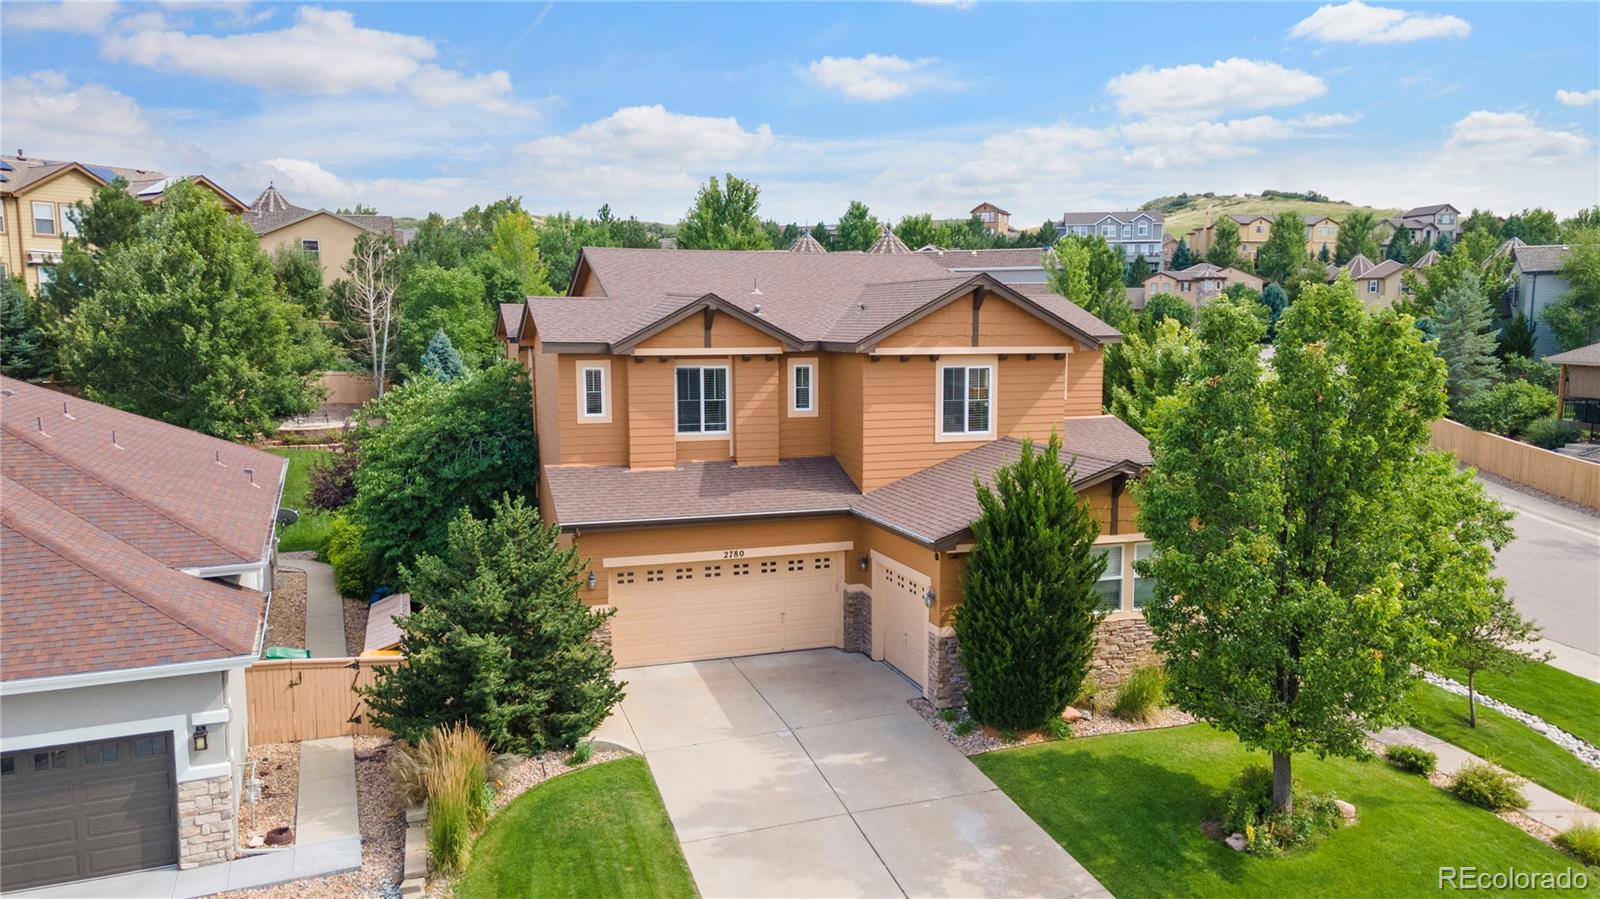 2780  Pemberly Avenue, highlands ranch MLS: 3641546 Beds: 6 Baths: 5 Price: $1,250,000